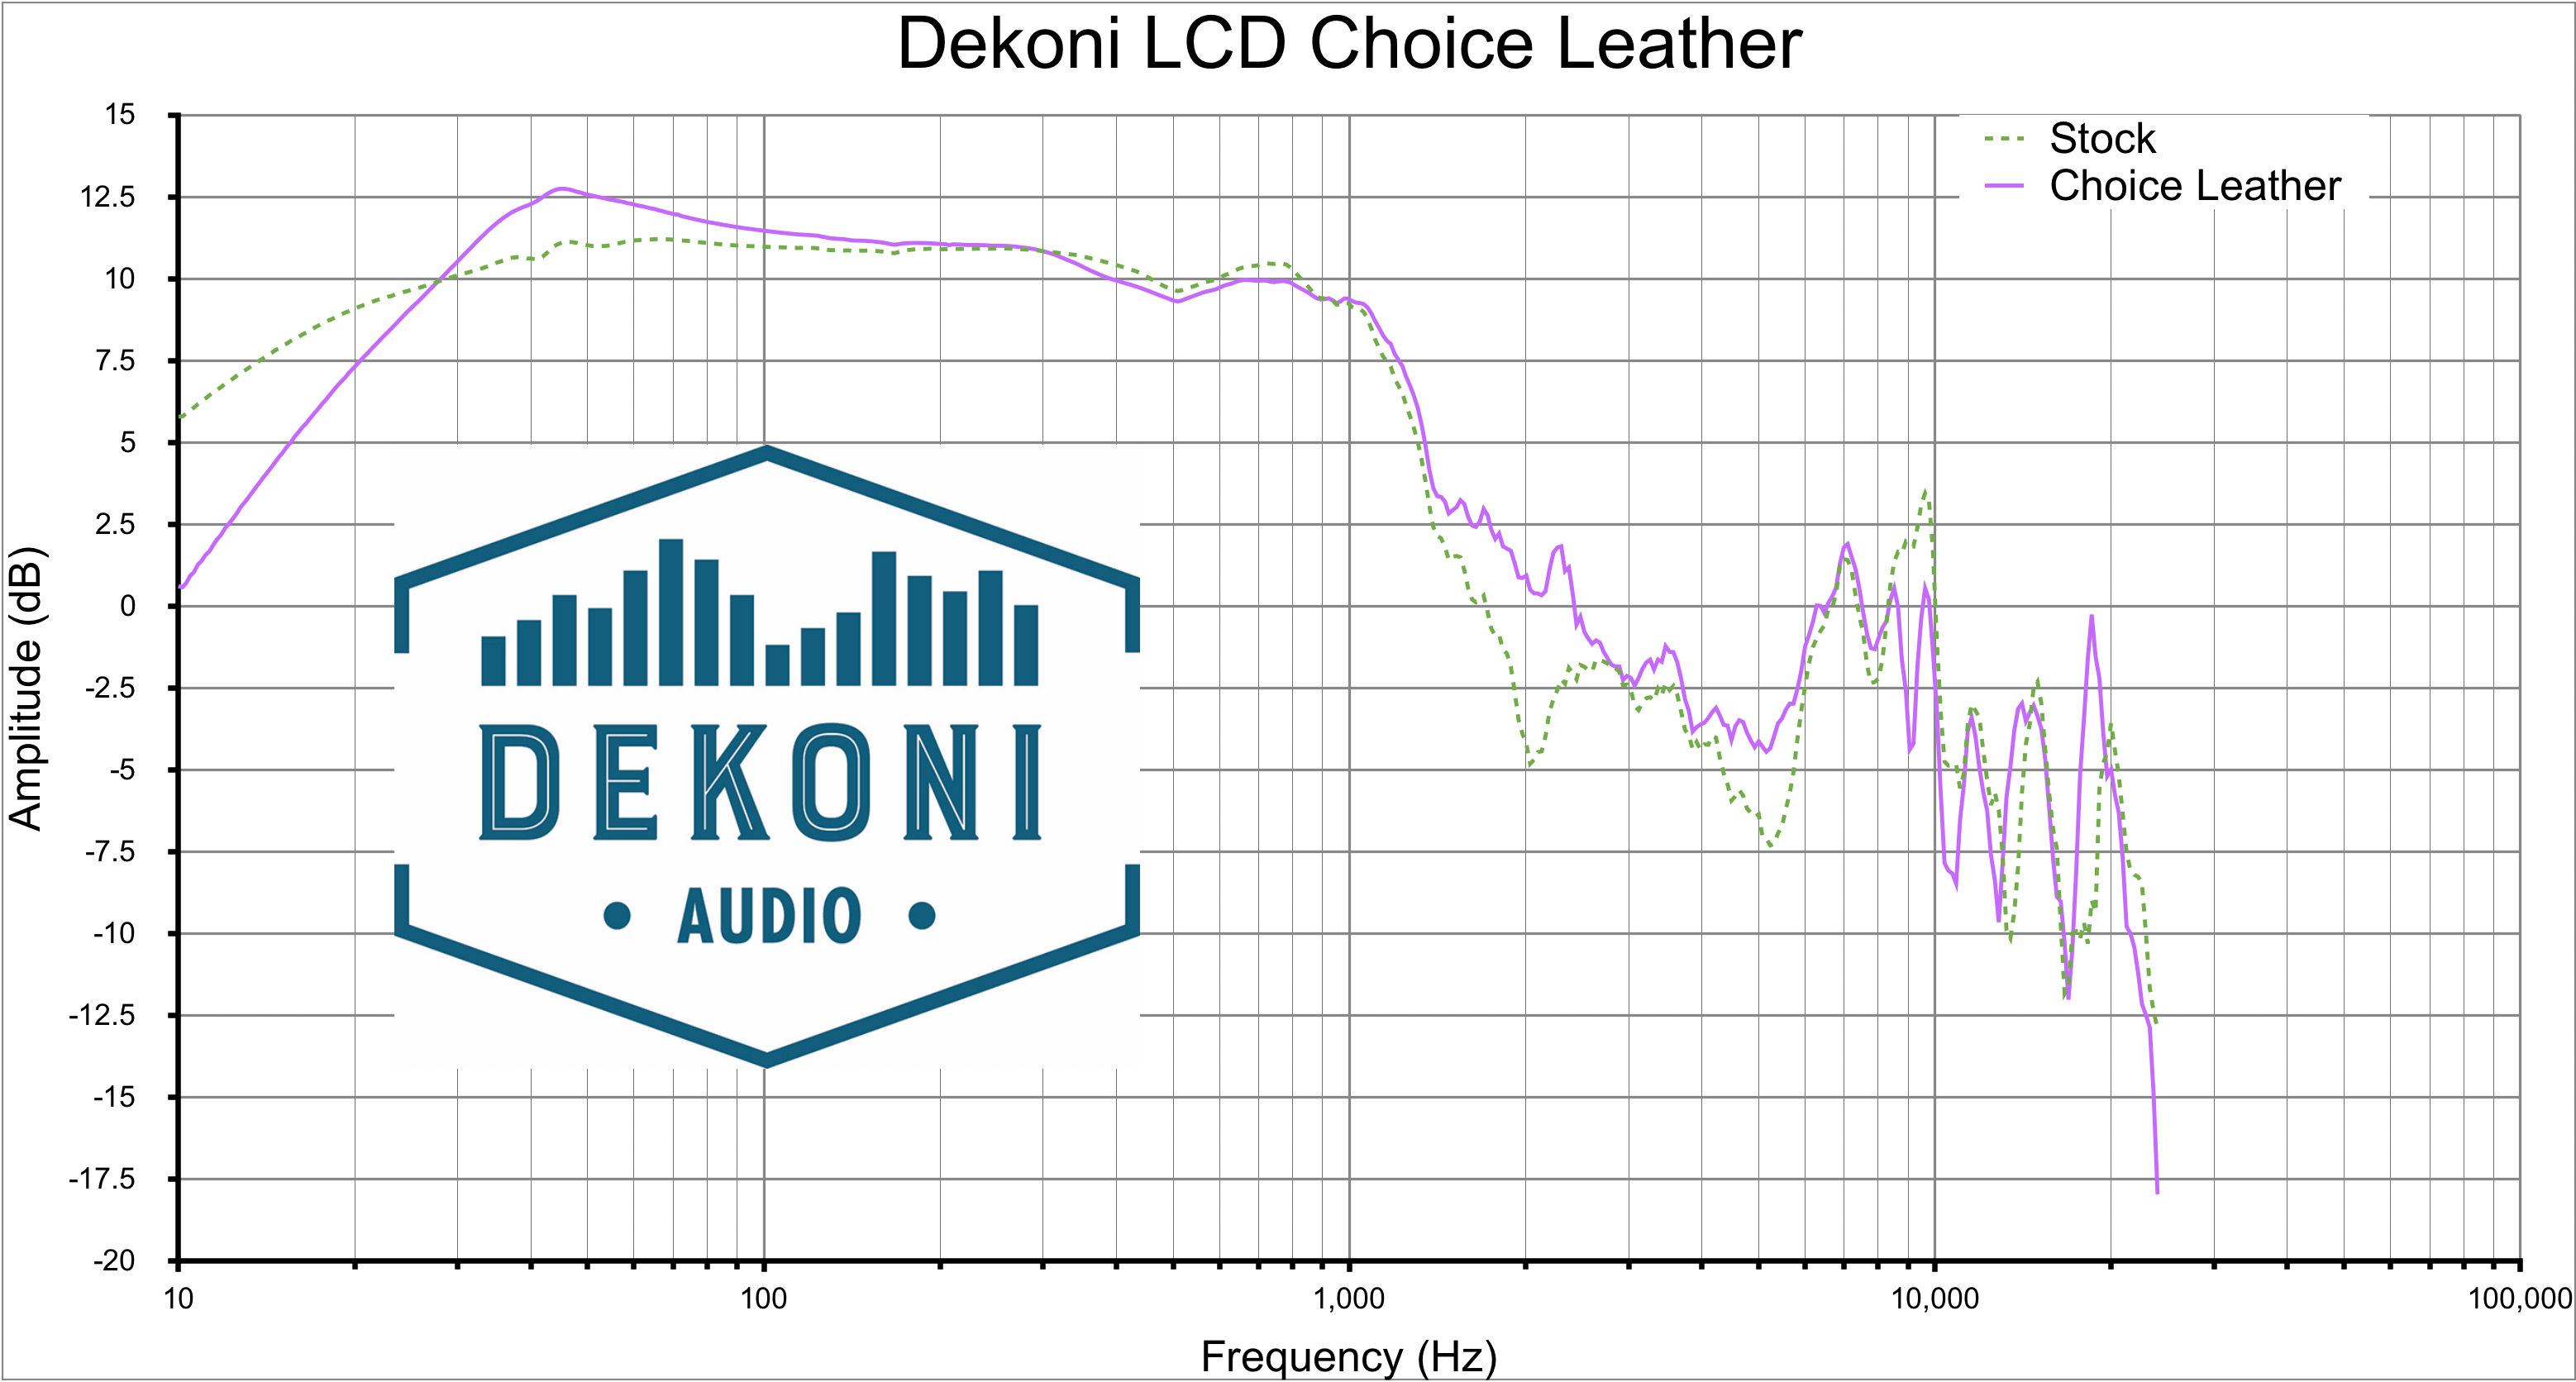 LCD Choice Leather